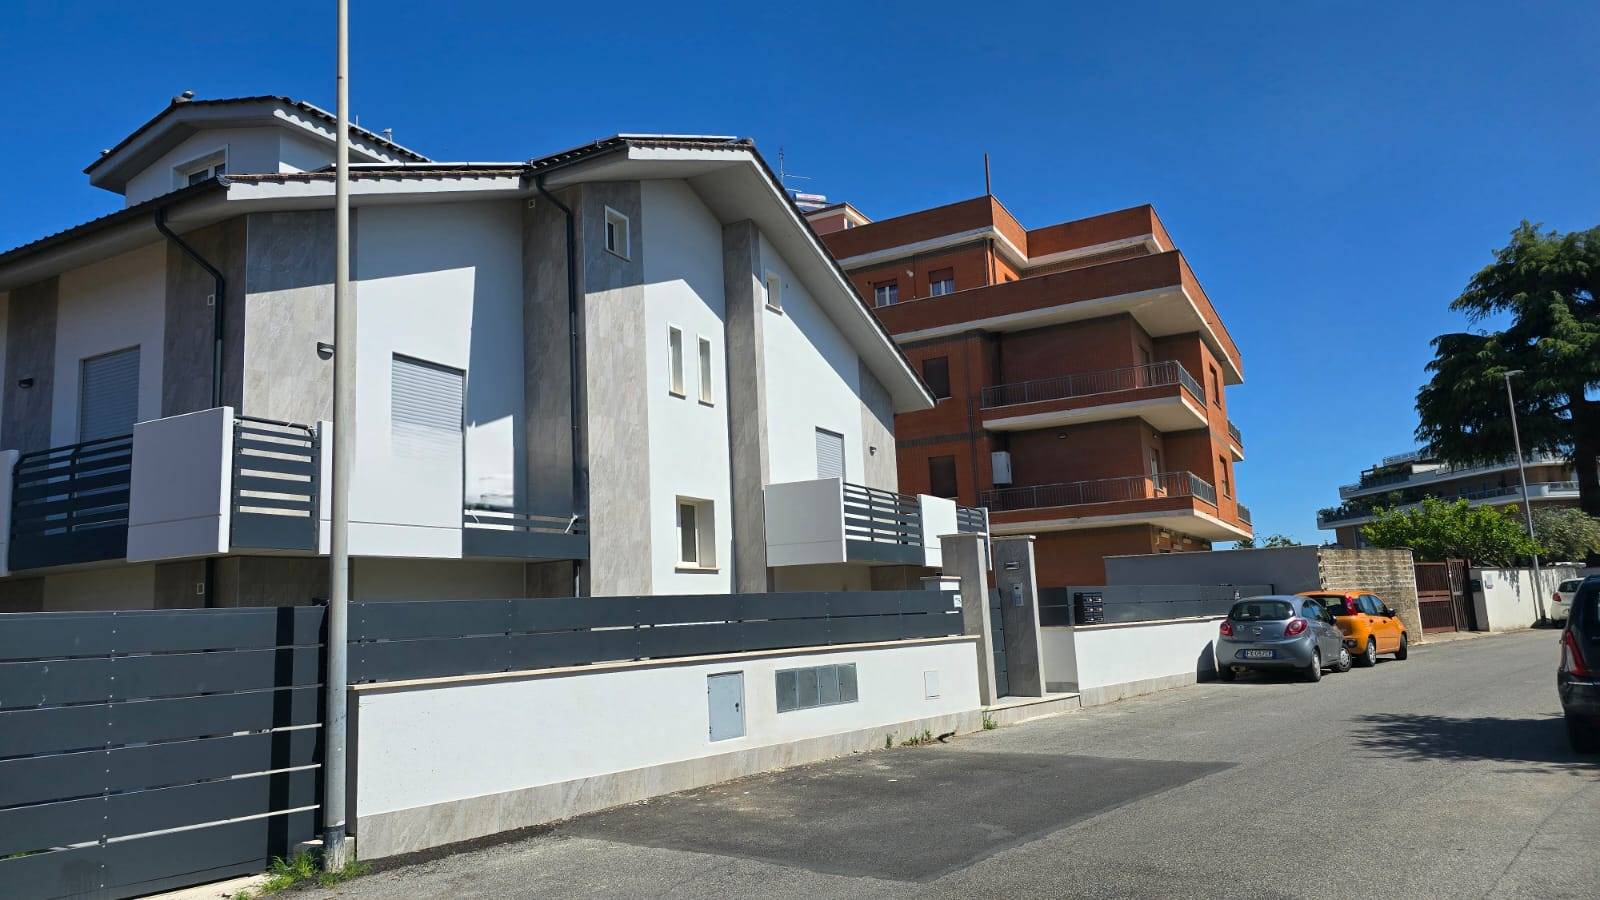 SELVA NERA, ROMA, Apartment for rent of 750 Sq. mt., New construction, Heating Individual heating system, Energetic class: A3, placed at 1° on 2, 